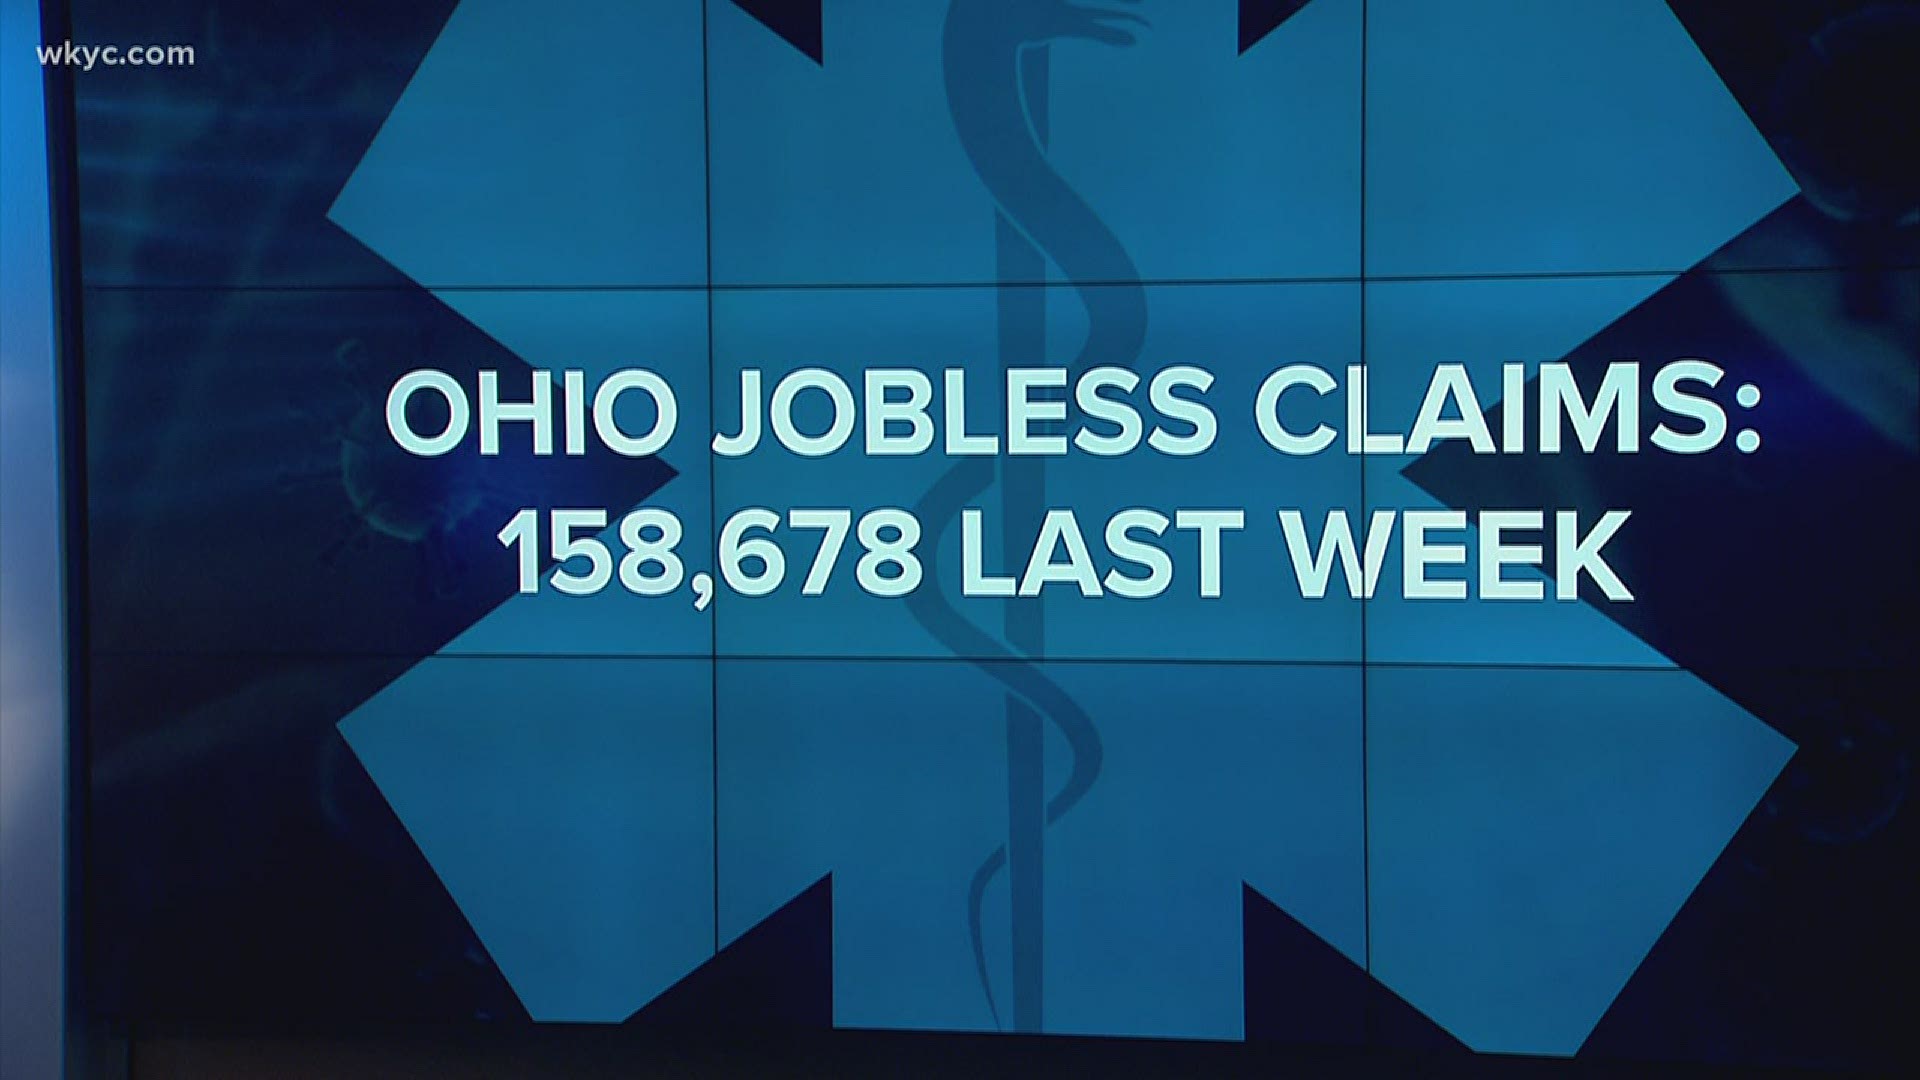 April 16, 2020: New jobless claims throughout the state have hit 855,197 throughout the last four weeks, according to data released this morning.